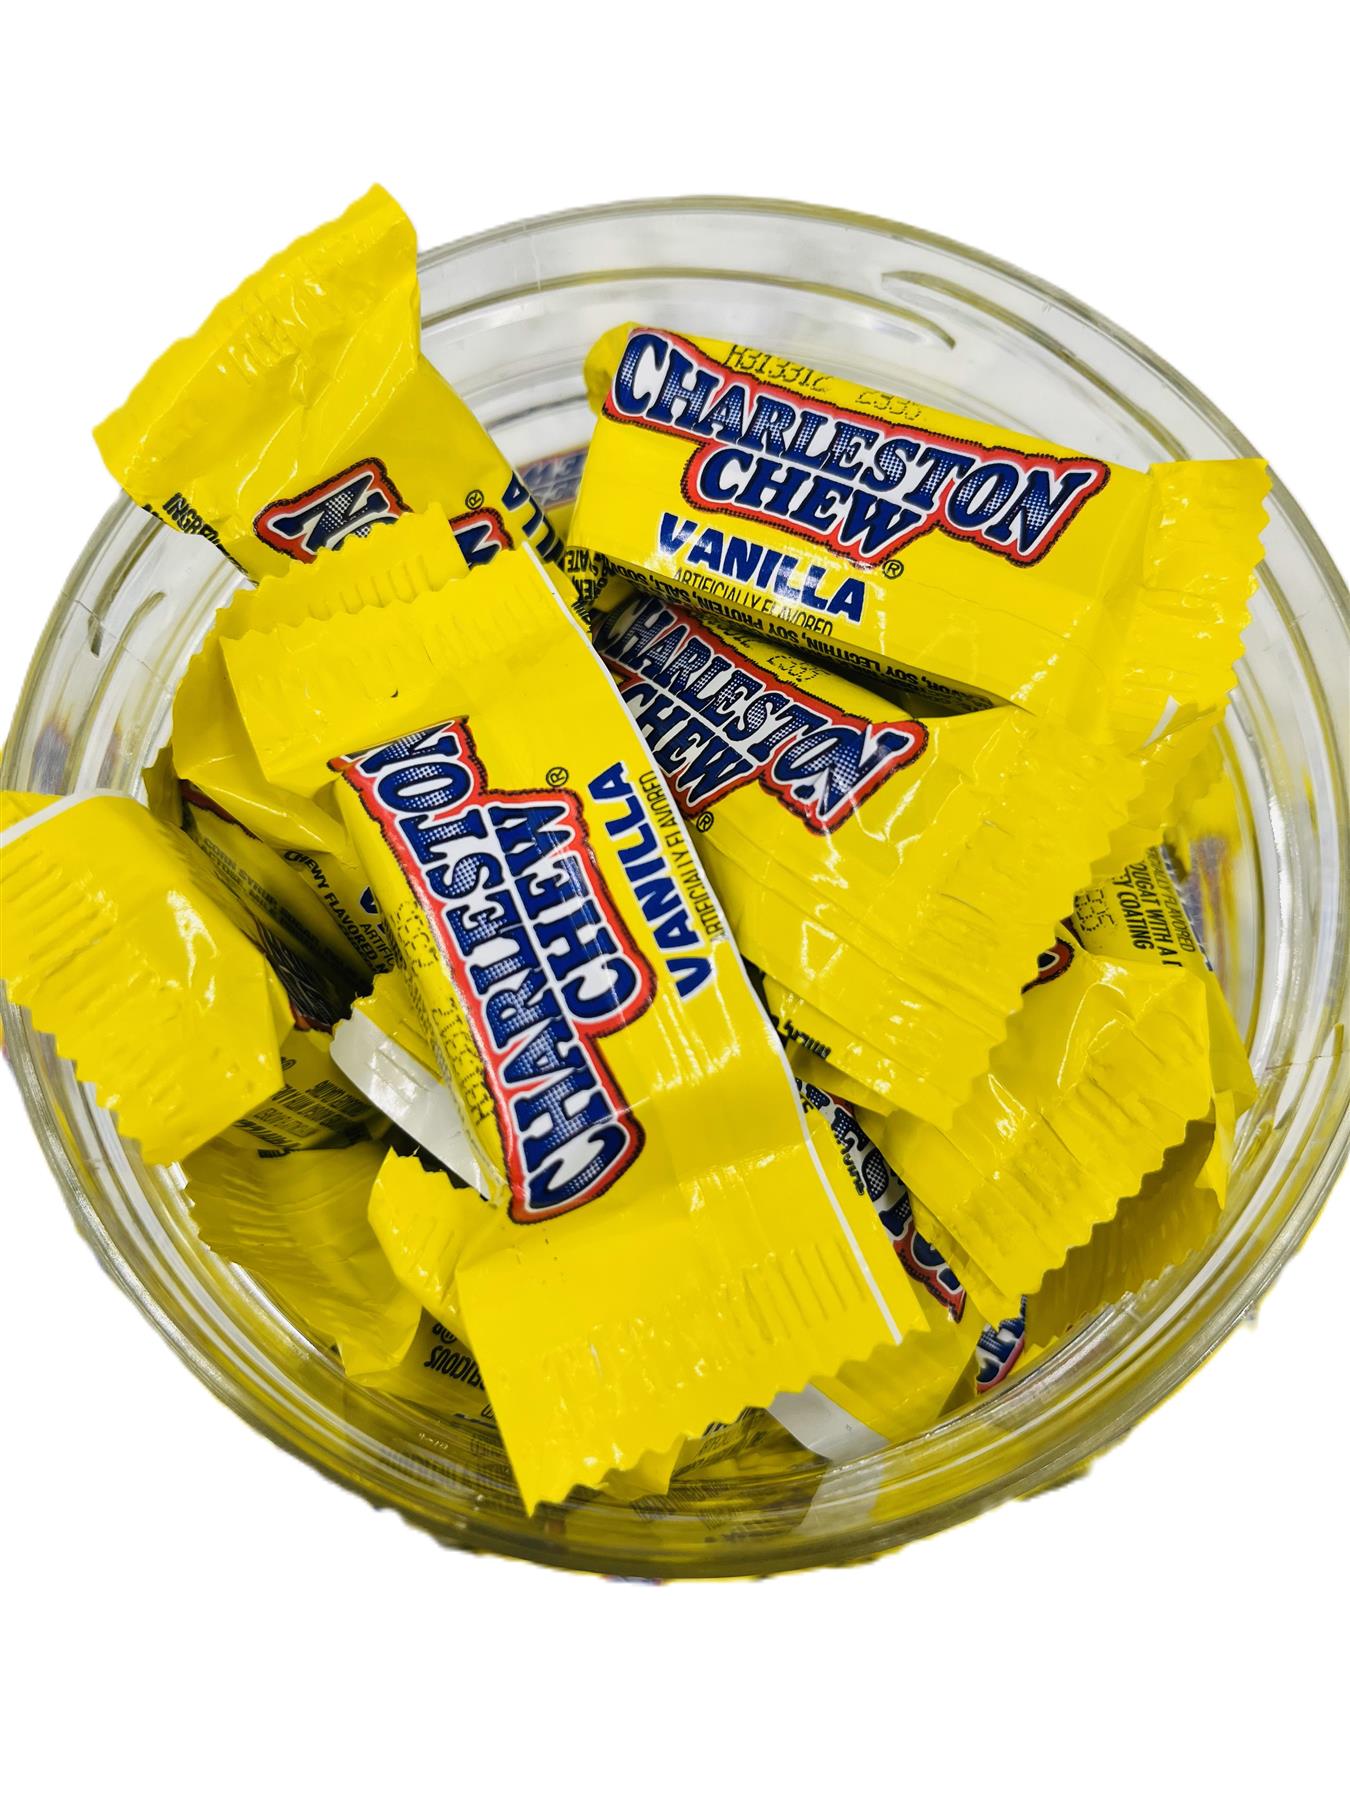 Simway Sweets Jar 560g - Charleston Chews Vanilla Minis - Individually Wrapped American Sweets - Approximately 60 Pieces